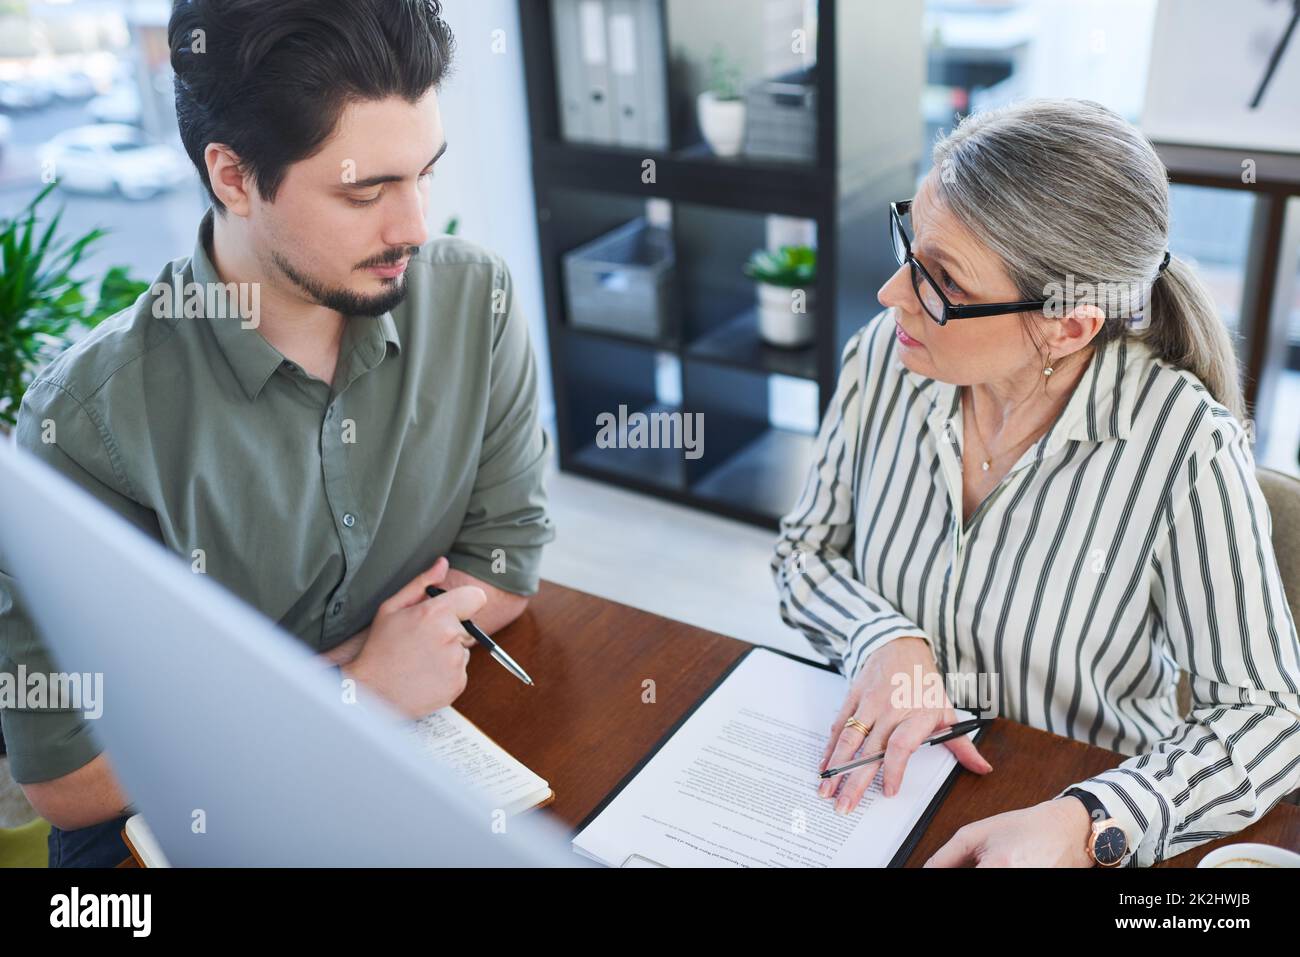 Their plans always work out perfectly. Shot of two businesspeople going through paperwork together in an office. Stock Photo